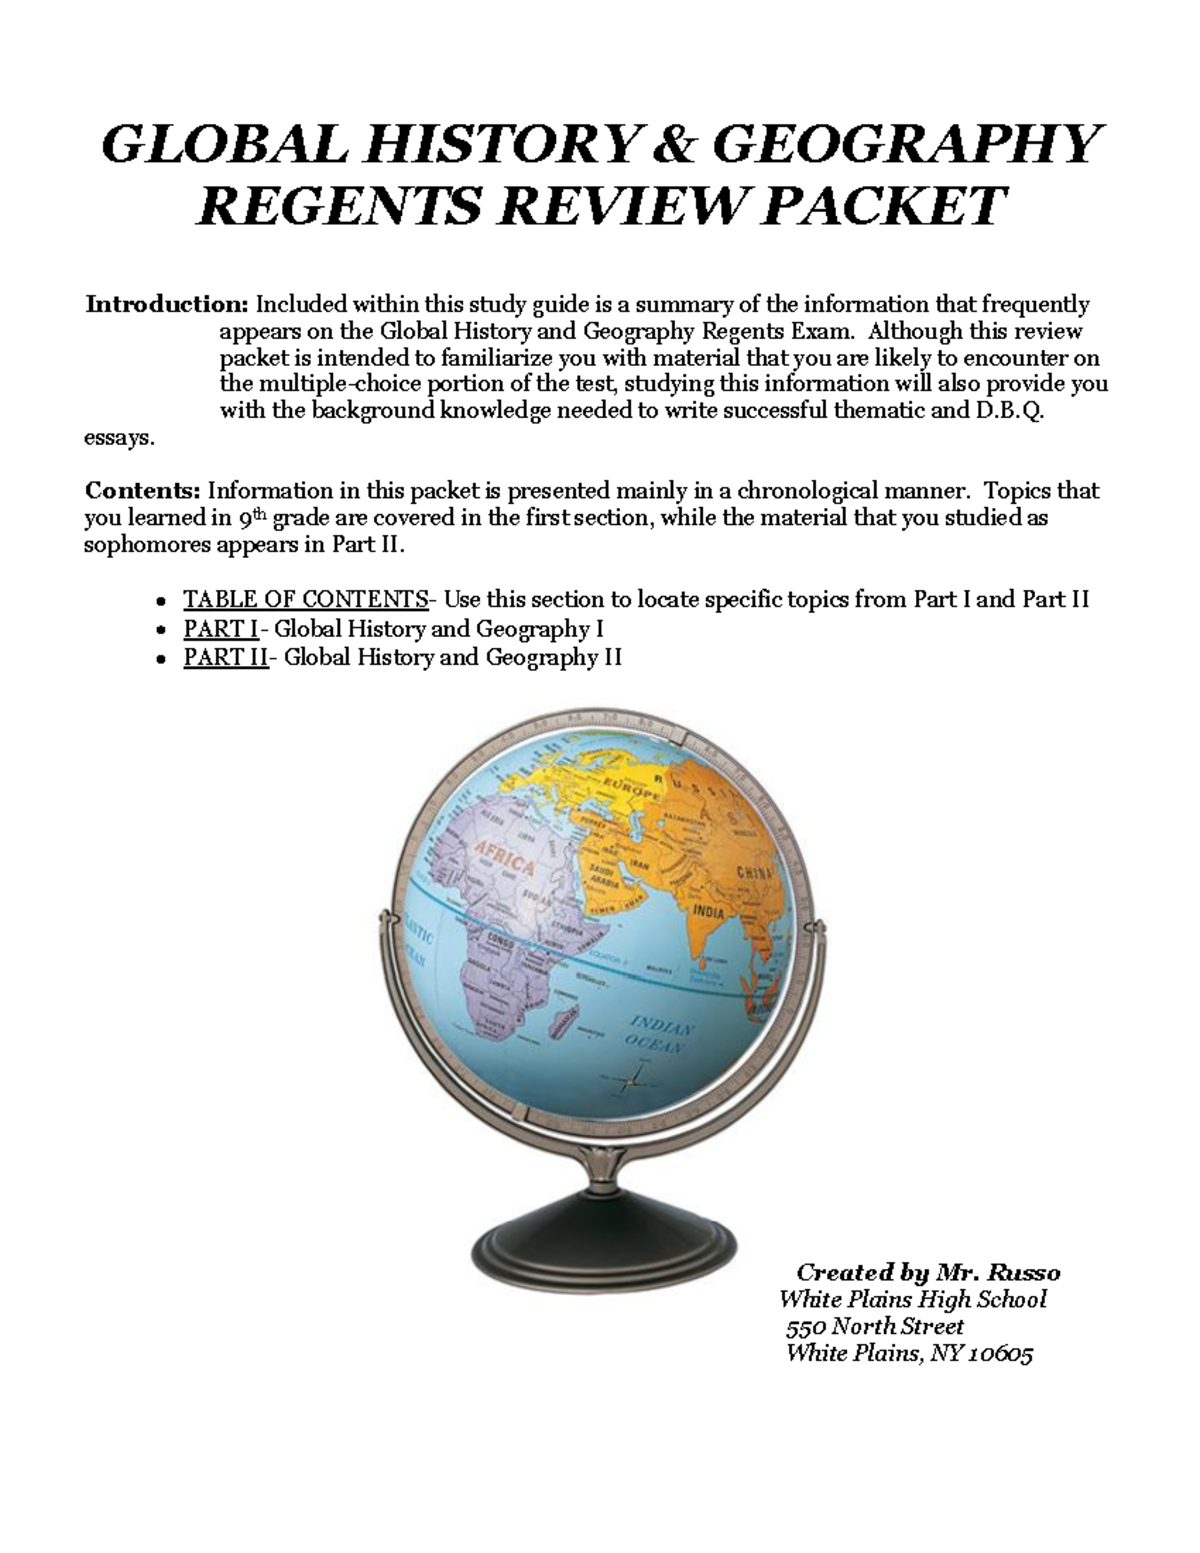 Regents review packet year 7 edition with index 1 GLOBAL HISTORY